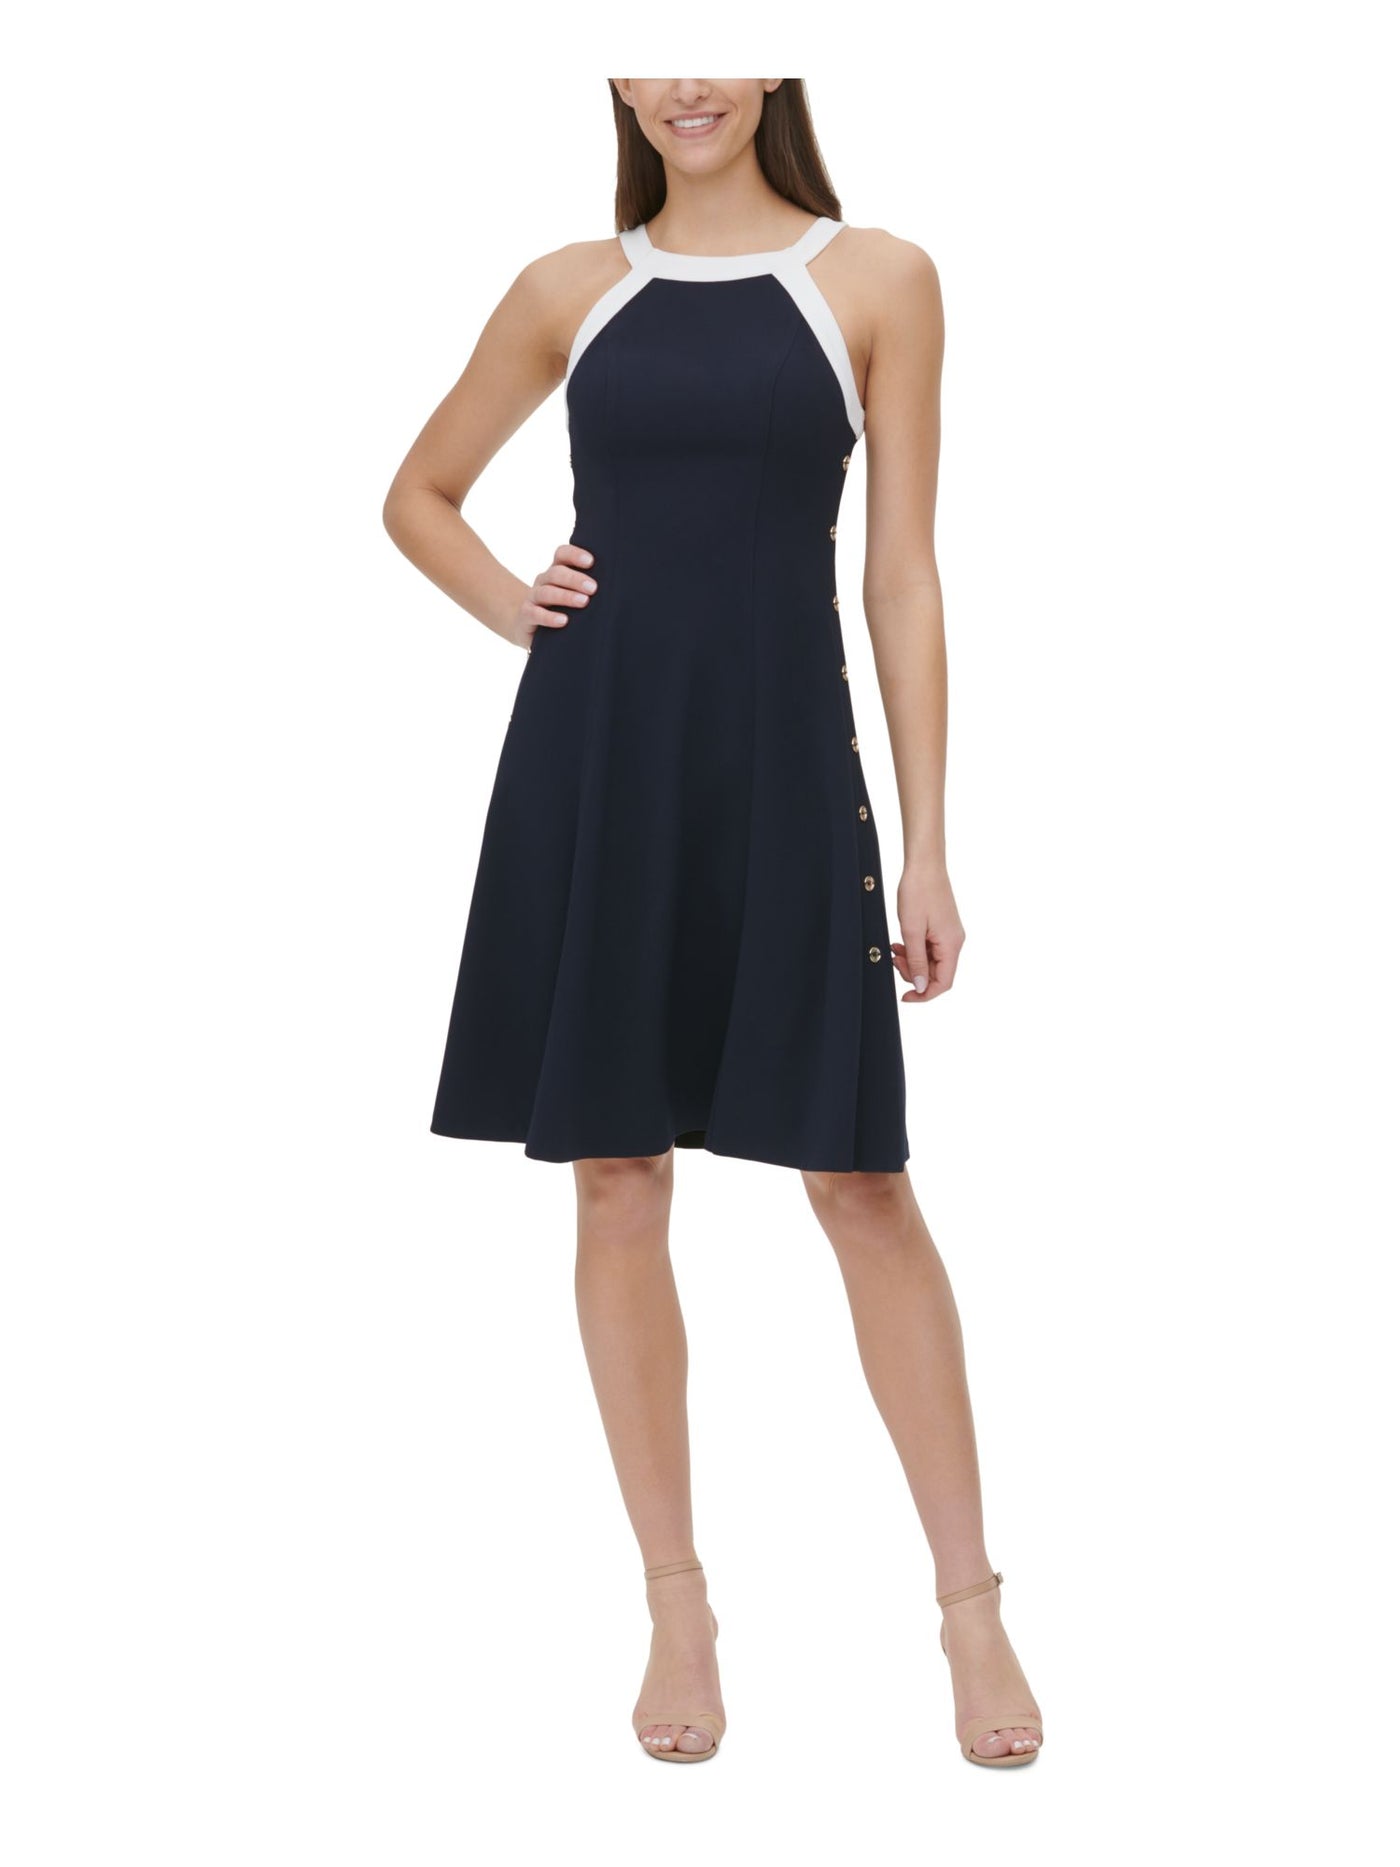 TOMMY HILFIGER Womens Navy Zippered Button Detail Unlined Color Block Sleeveless Halter Above The Knee Fit + Flare Dress Petites 2P